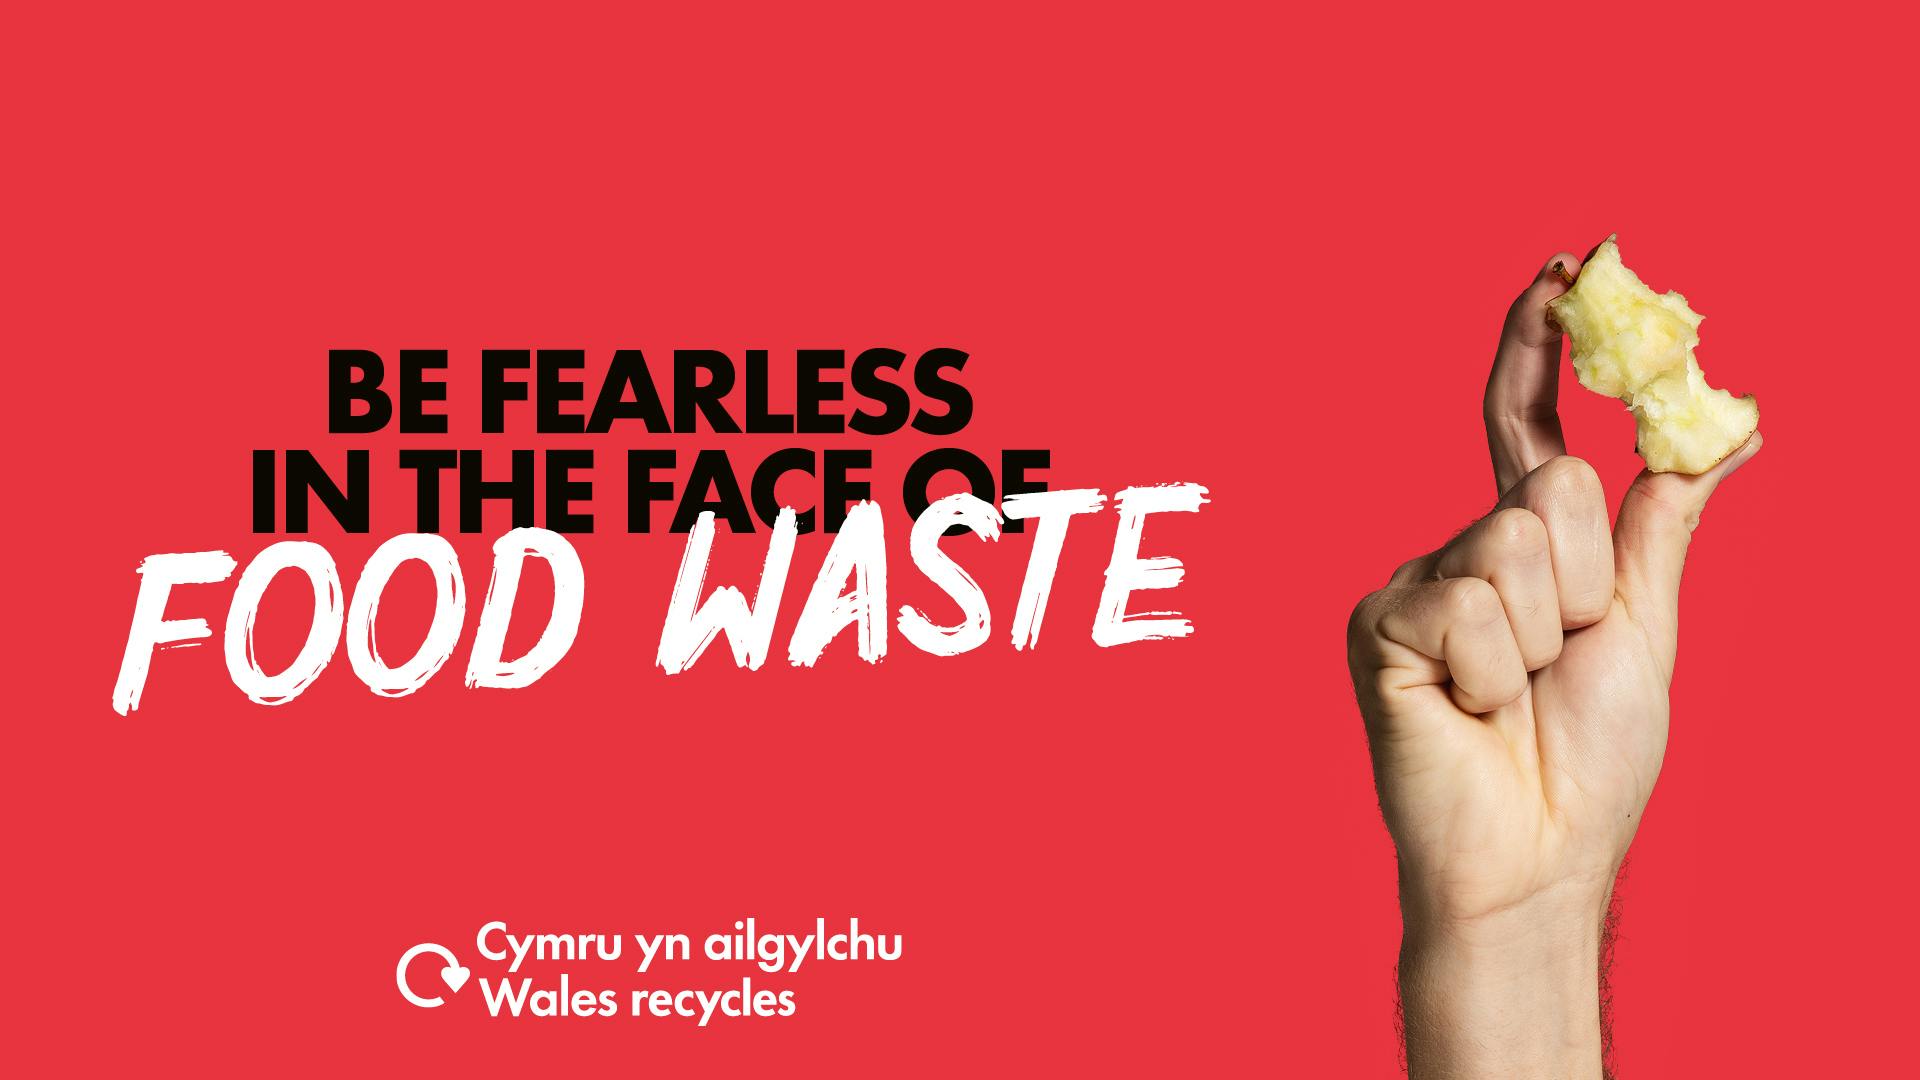 White hand holding an apple core with the caption "Be fearless in the face of food waste"